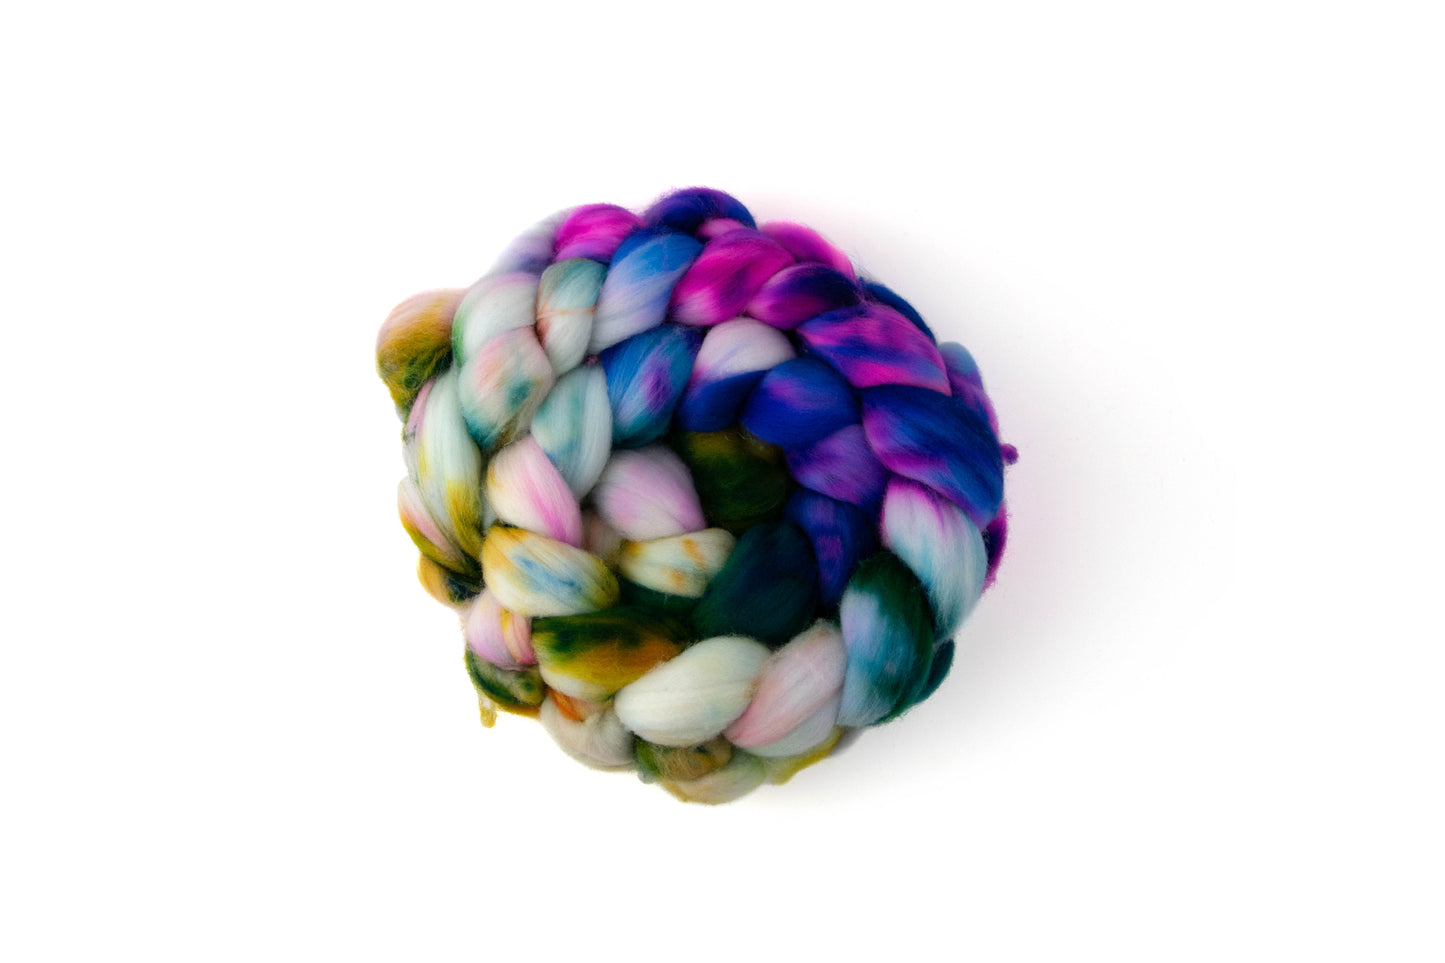 A braid of fiber with blue, pink, purple, yellow, green, and white.